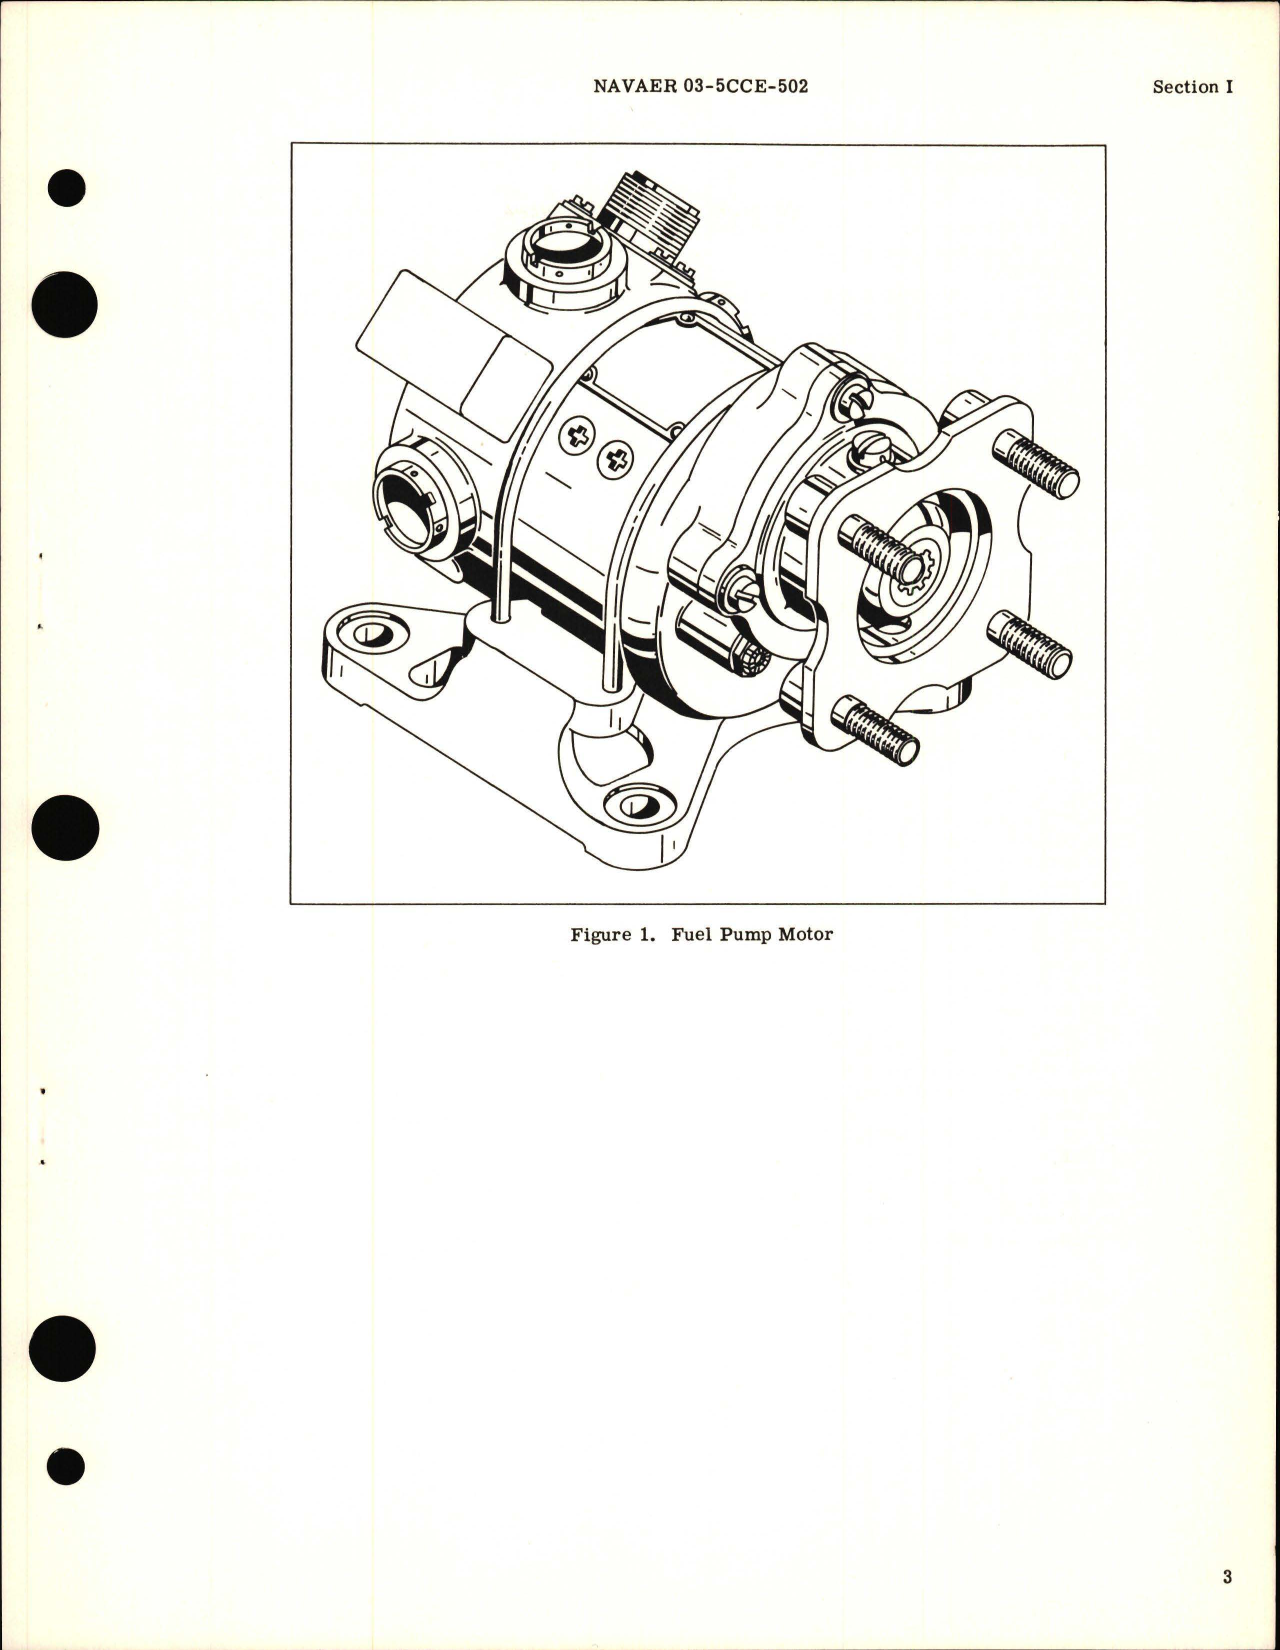 Sample page 5 from AirCorps Library document: Illustrated Parts Breakdown for Motor Assembly A8574A1